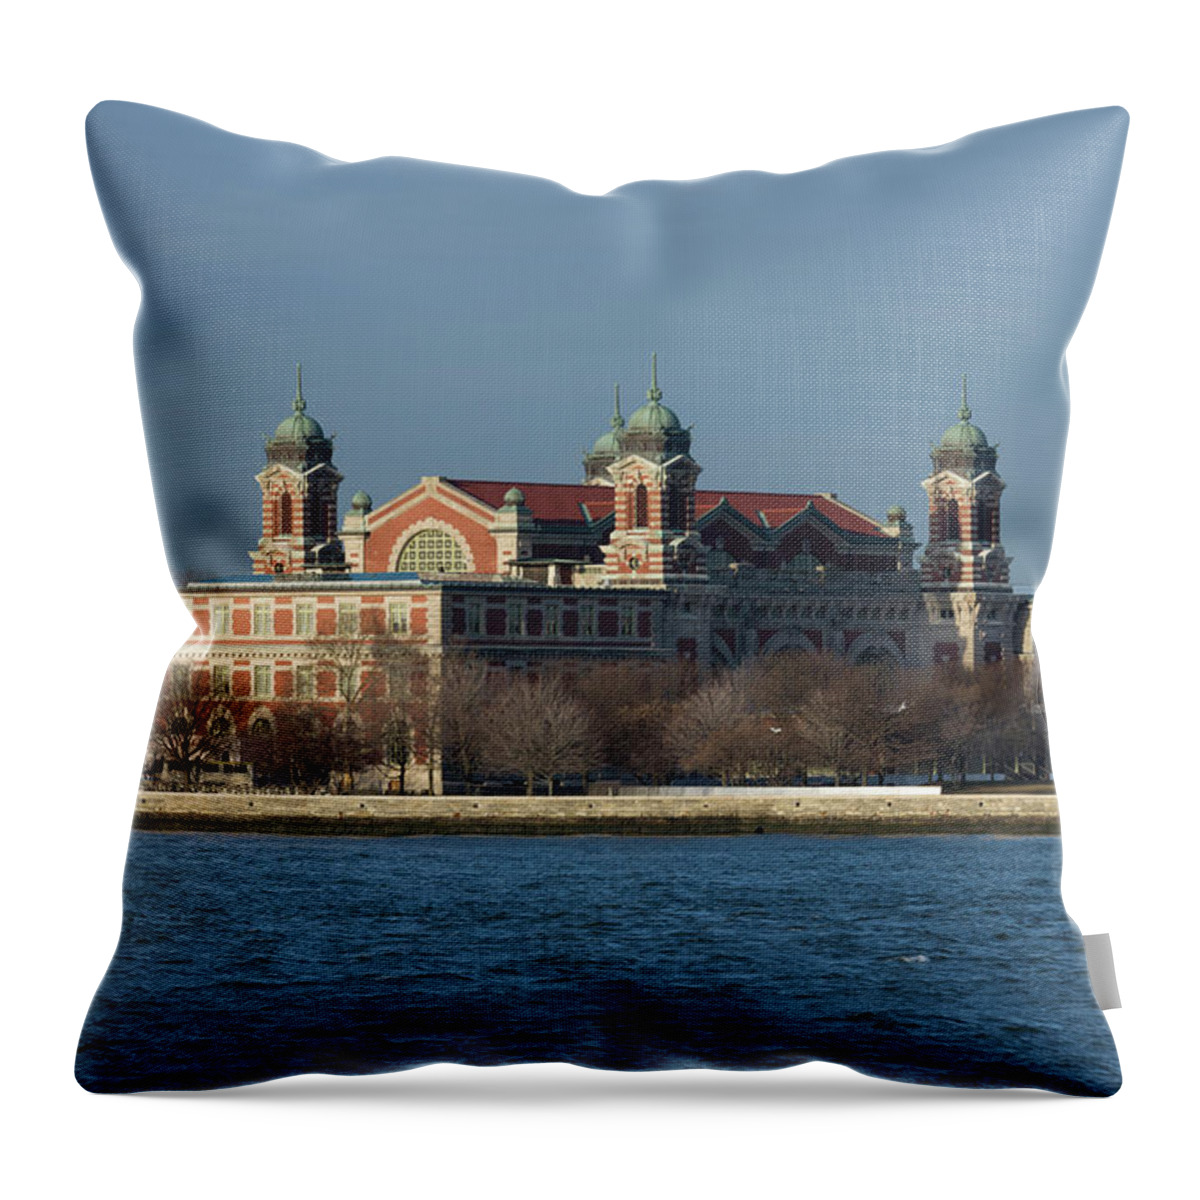 Photography Throw Pillow featuring the photograph Ellis Island Immigration Museum by Panoramic Images